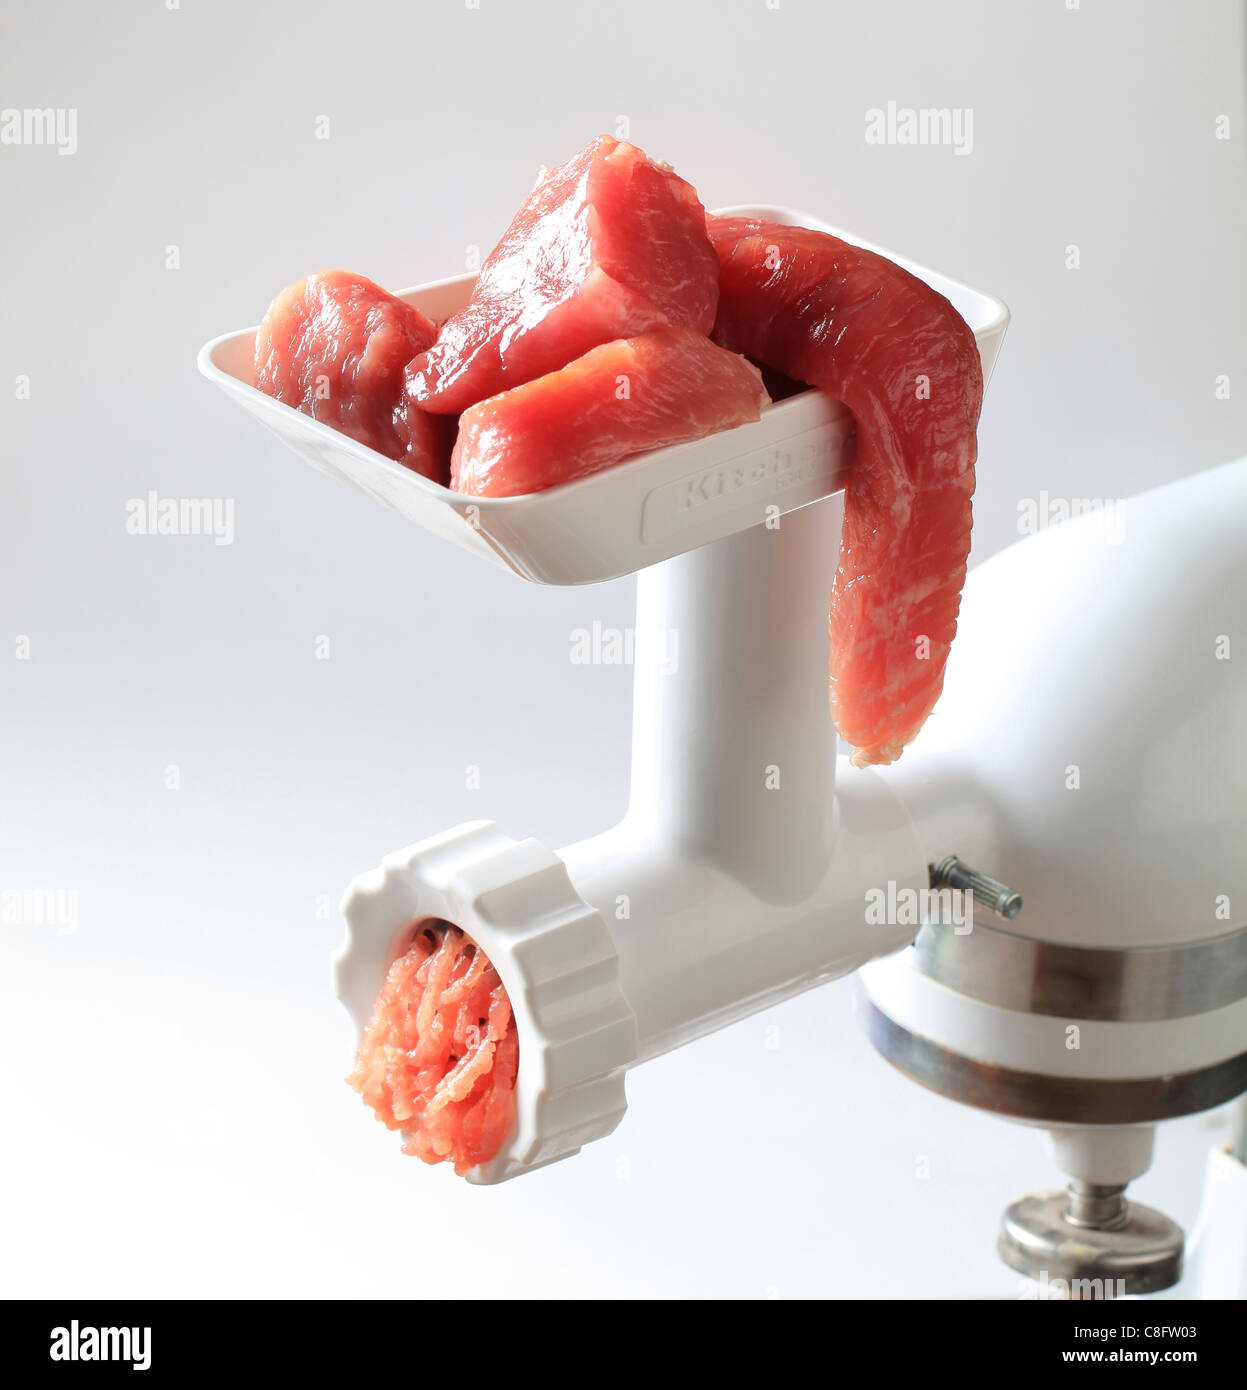 https://c8.alamy.com/comp/C8FW03/fresh-minced-meat-coming-out-of-a-meat-grinder-C8FW03.jpg